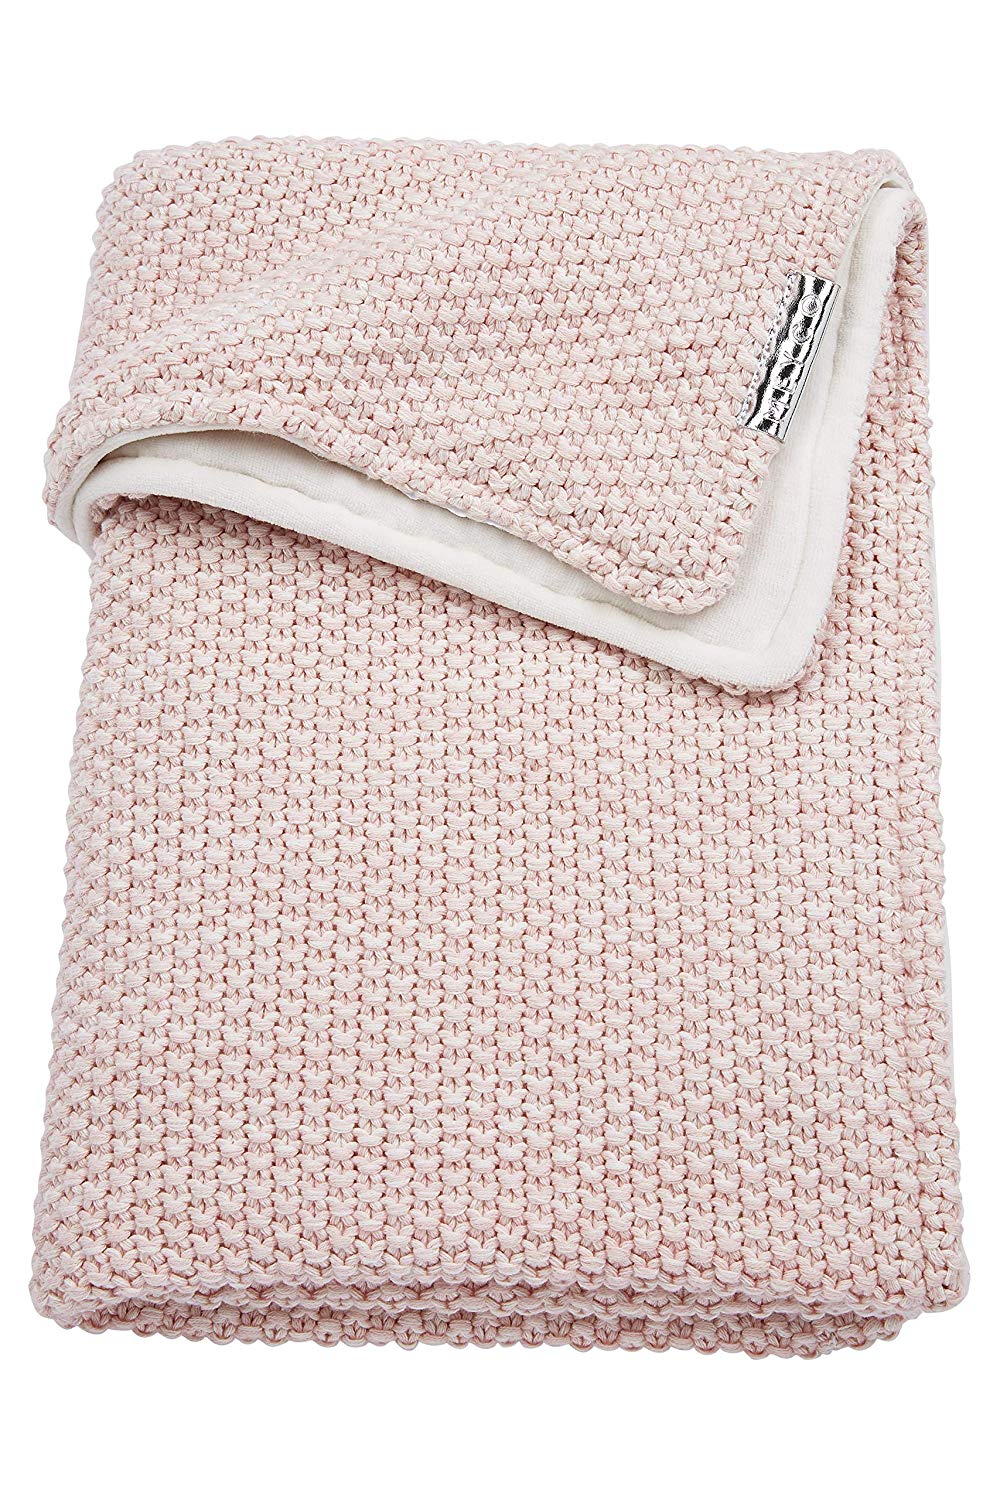 Meyco 2754083 Winter Relief Mix Coarse Knitted Blanket 100 x 150 cm Pink